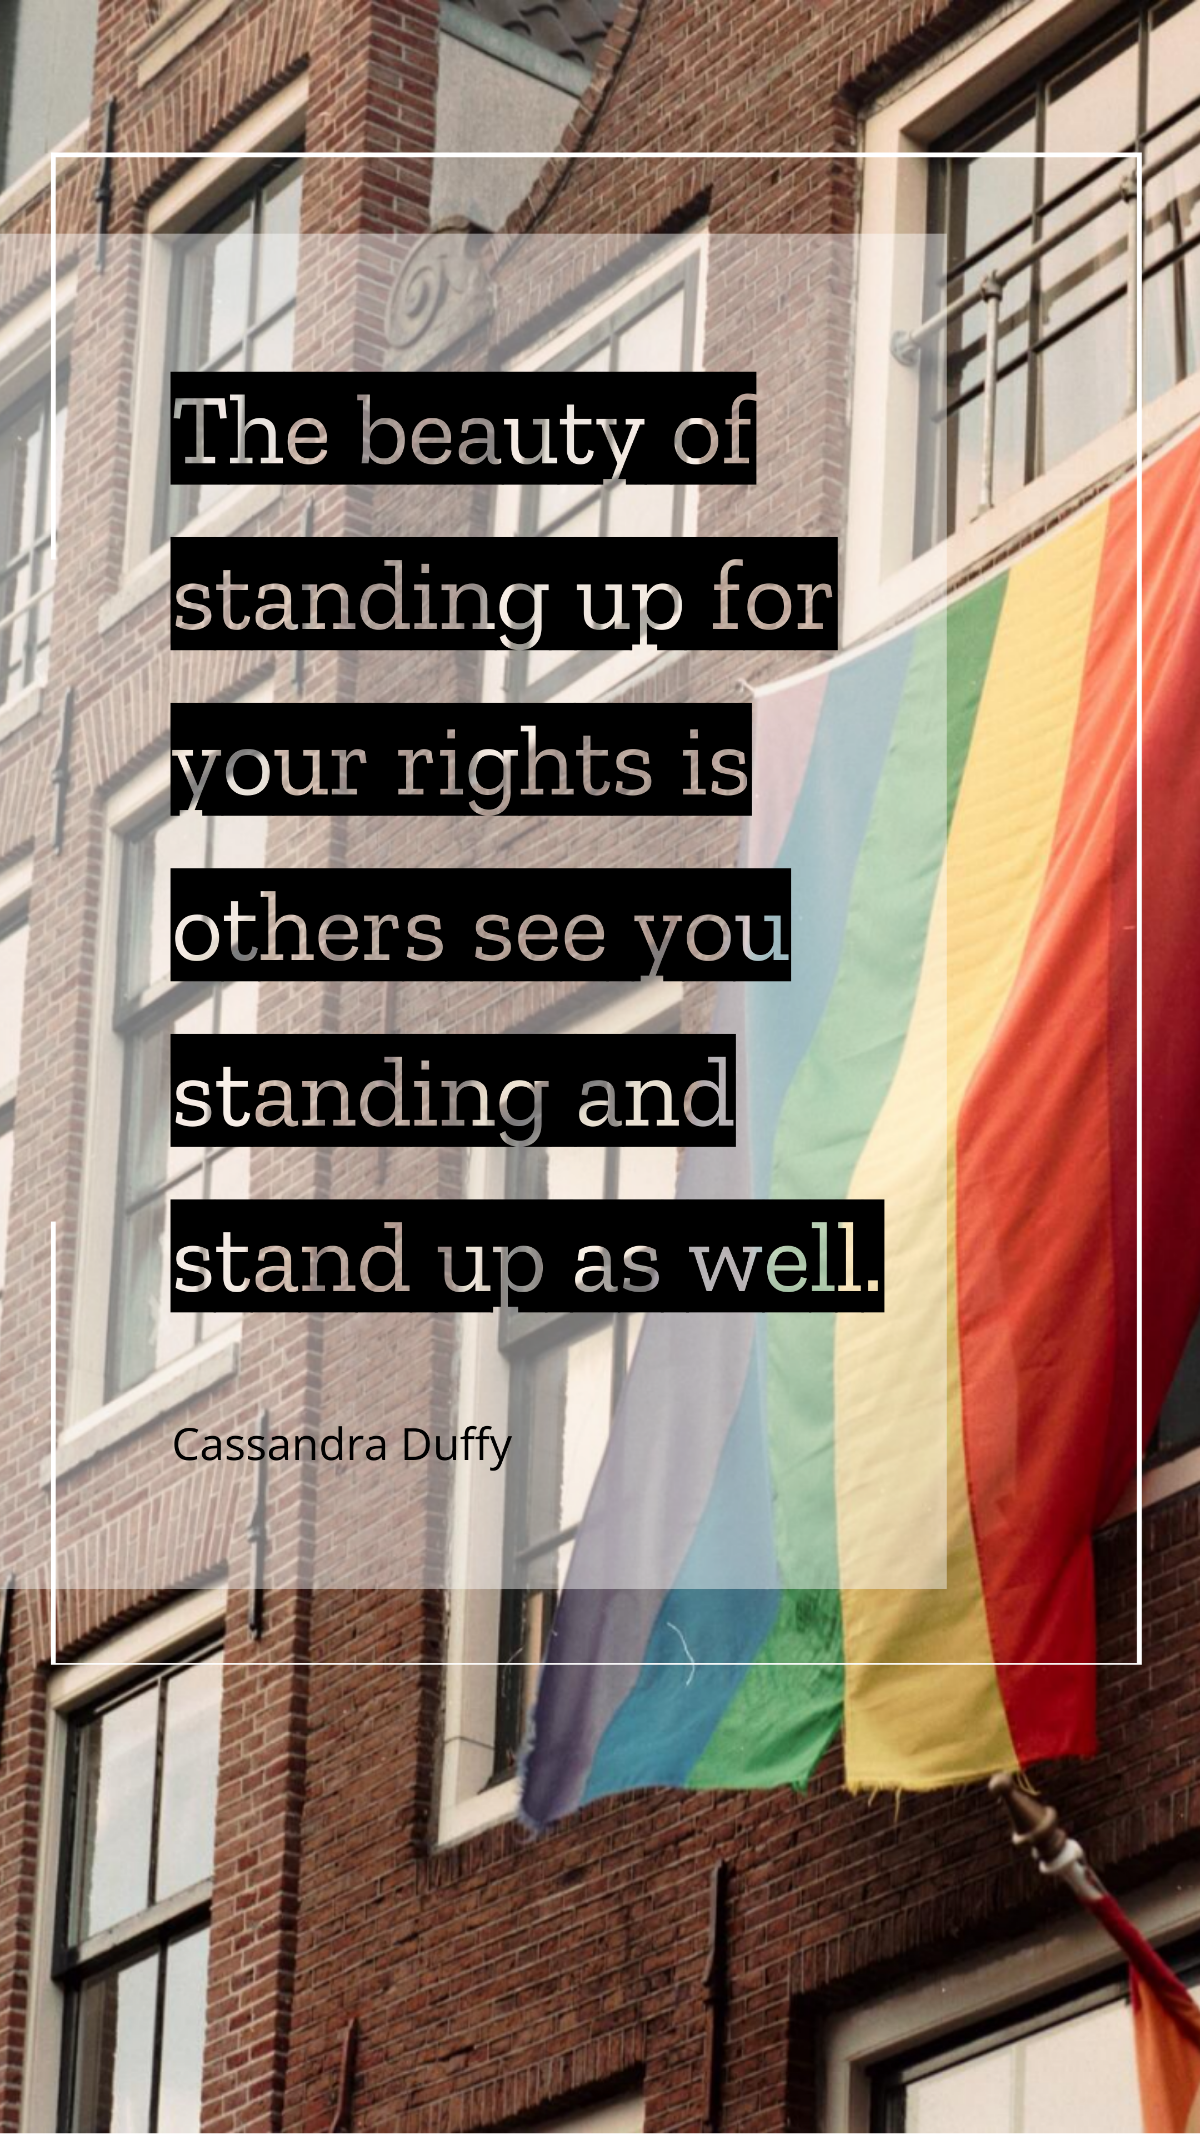 Cassandra Duffy - The beauty of standing up for your rights is others see you standing and stand up as well. Template